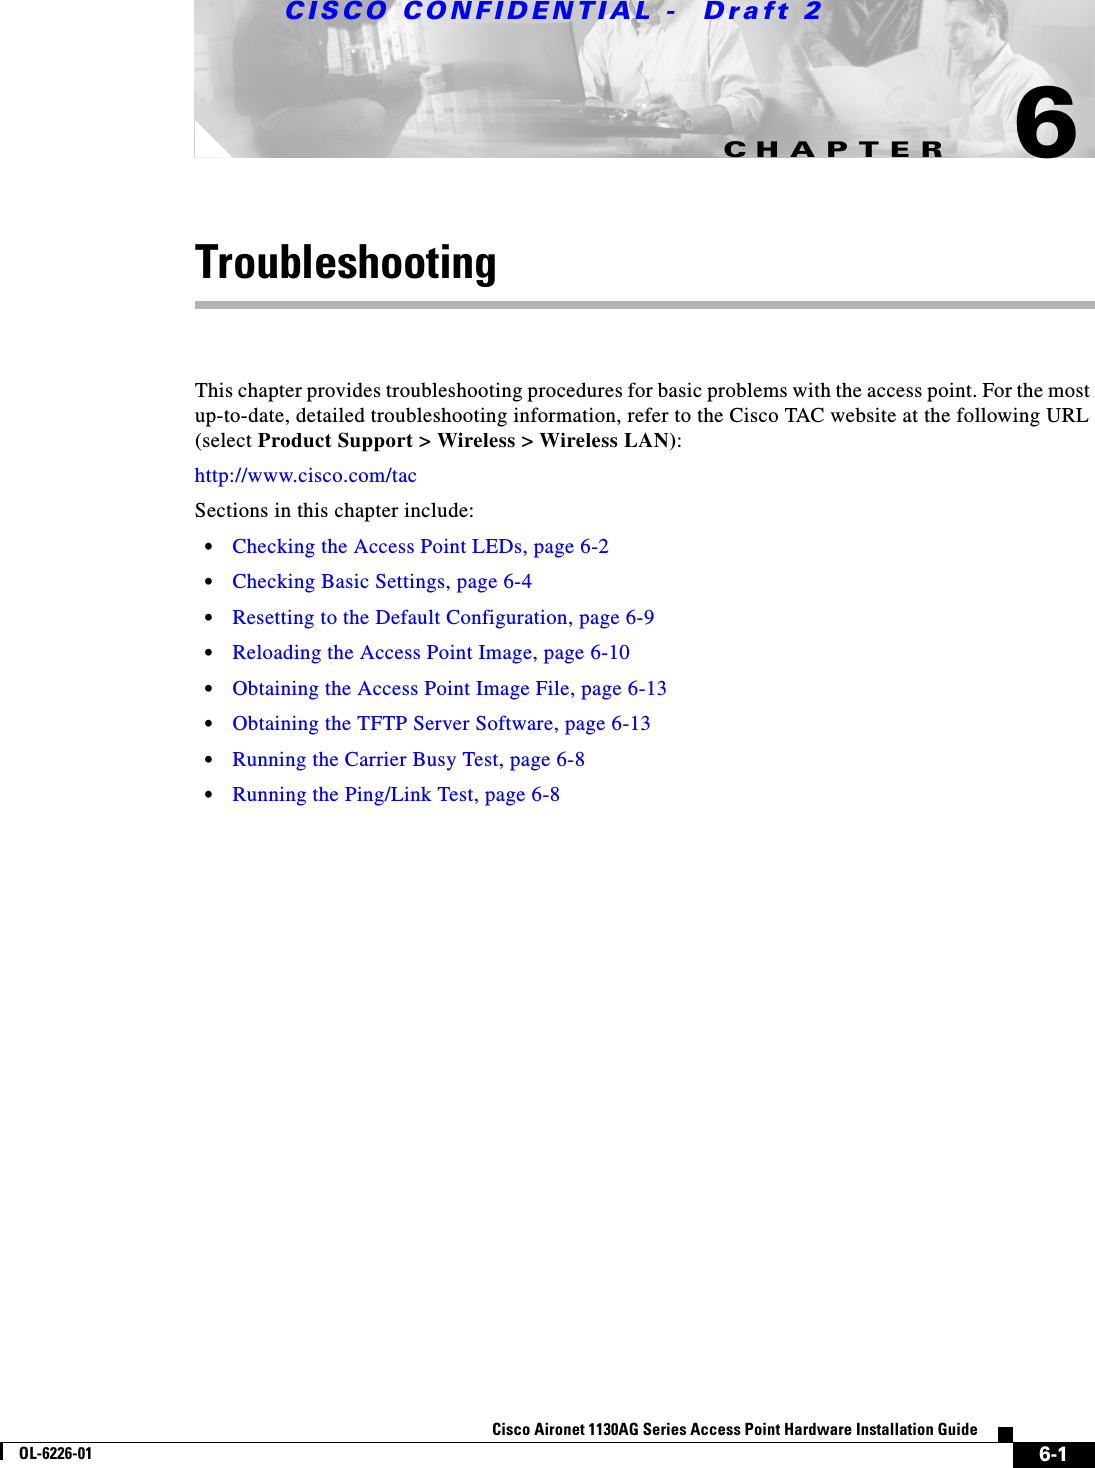 CHAPTER CISCO CONFIDENTIAL -  Draft 26-1Cisco Aironet 1130AG Series Access Point Hardware Installation GuideOL-6226-016TroubleshootingThis chapter provides troubleshooting procedures for basic problems with the access point. For the most up-to-date, detailed troubleshooting information, refer to the Cisco TAC website at the following URL (select Product Support &gt; Wireless &gt; Wireless LAN):http://www.cisco.com/tac Sections in this chapter include:•Checking the Access Point LEDs, page 6-2•Checking Basic Settings, page 6-4•Resetting to the Default Configuration, page 6-9•Reloading the Access Point Image, page 6-10•Obtaining the Access Point Image File, page 6-13•Obtaining the TFTP Server Software, page 6-13•Running the Carrier Busy Test, page 6-8•Running the Ping/Link Test, page 6-8